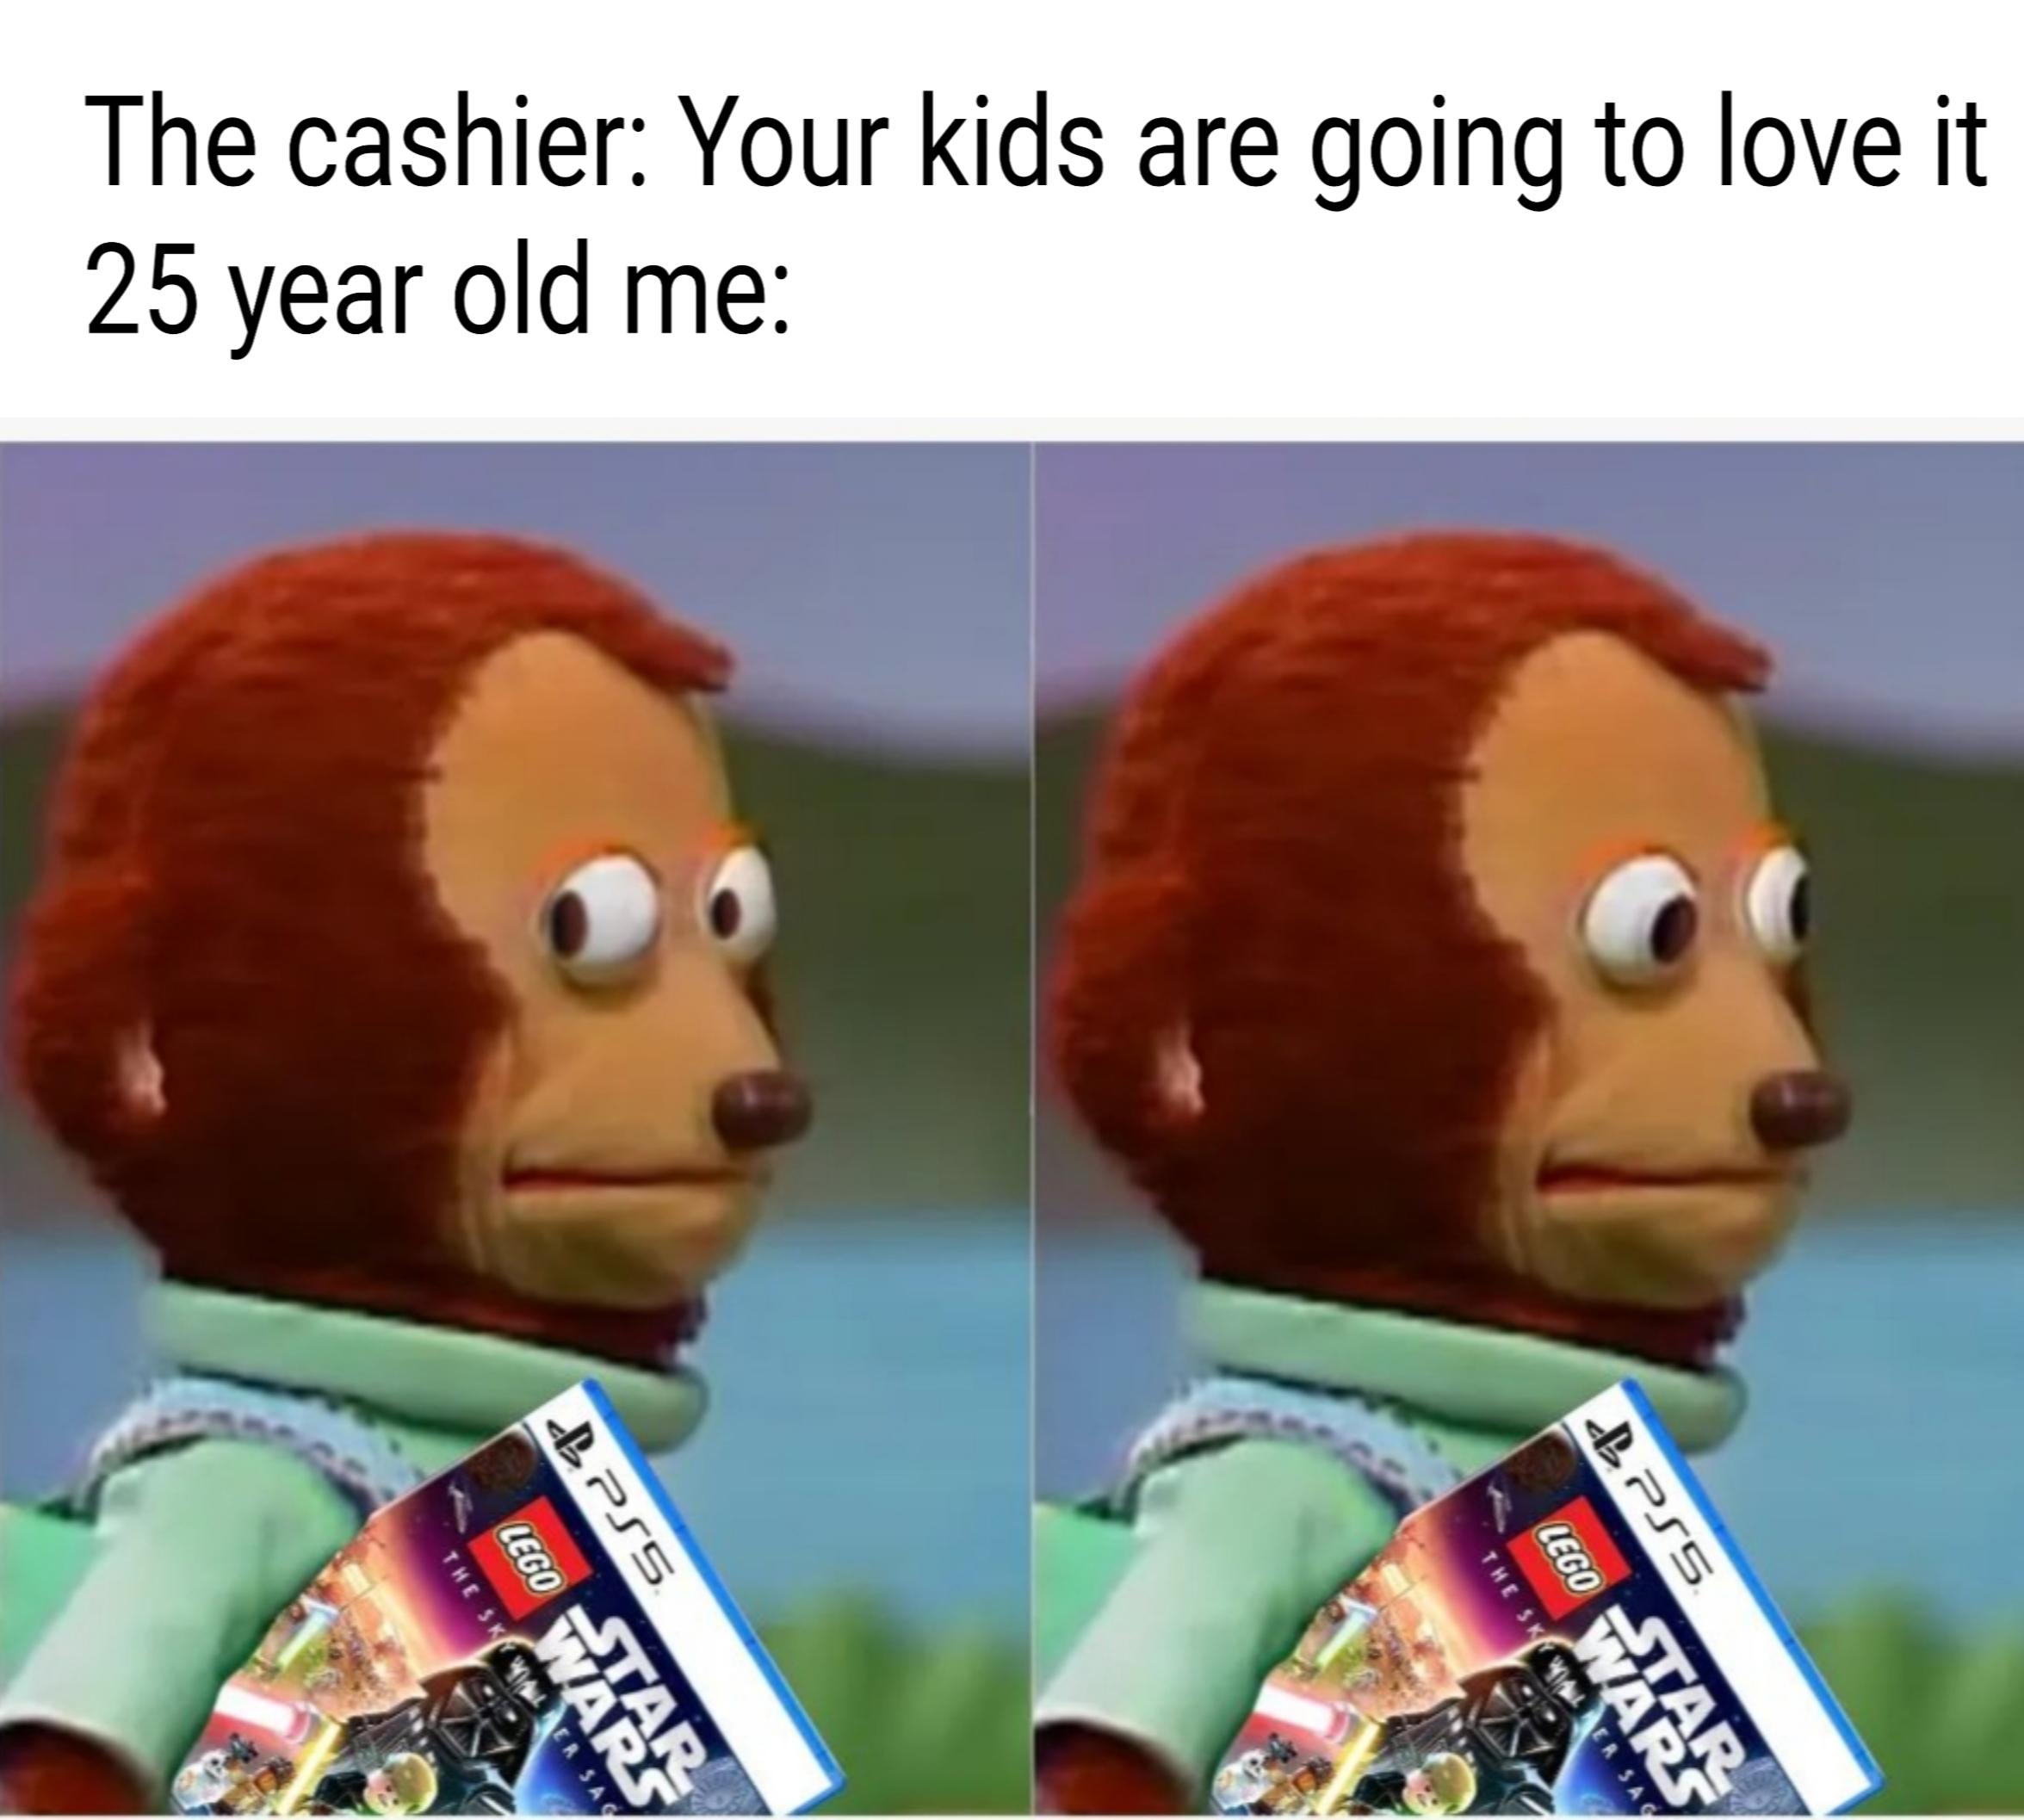 gaming memes - chastity frustration - Bpss Wars Er Sac Lego Tar The Sk The cashier Your kids are going to love it 25 year old me Er Sas Bpss Lego Tar Wars The Sky